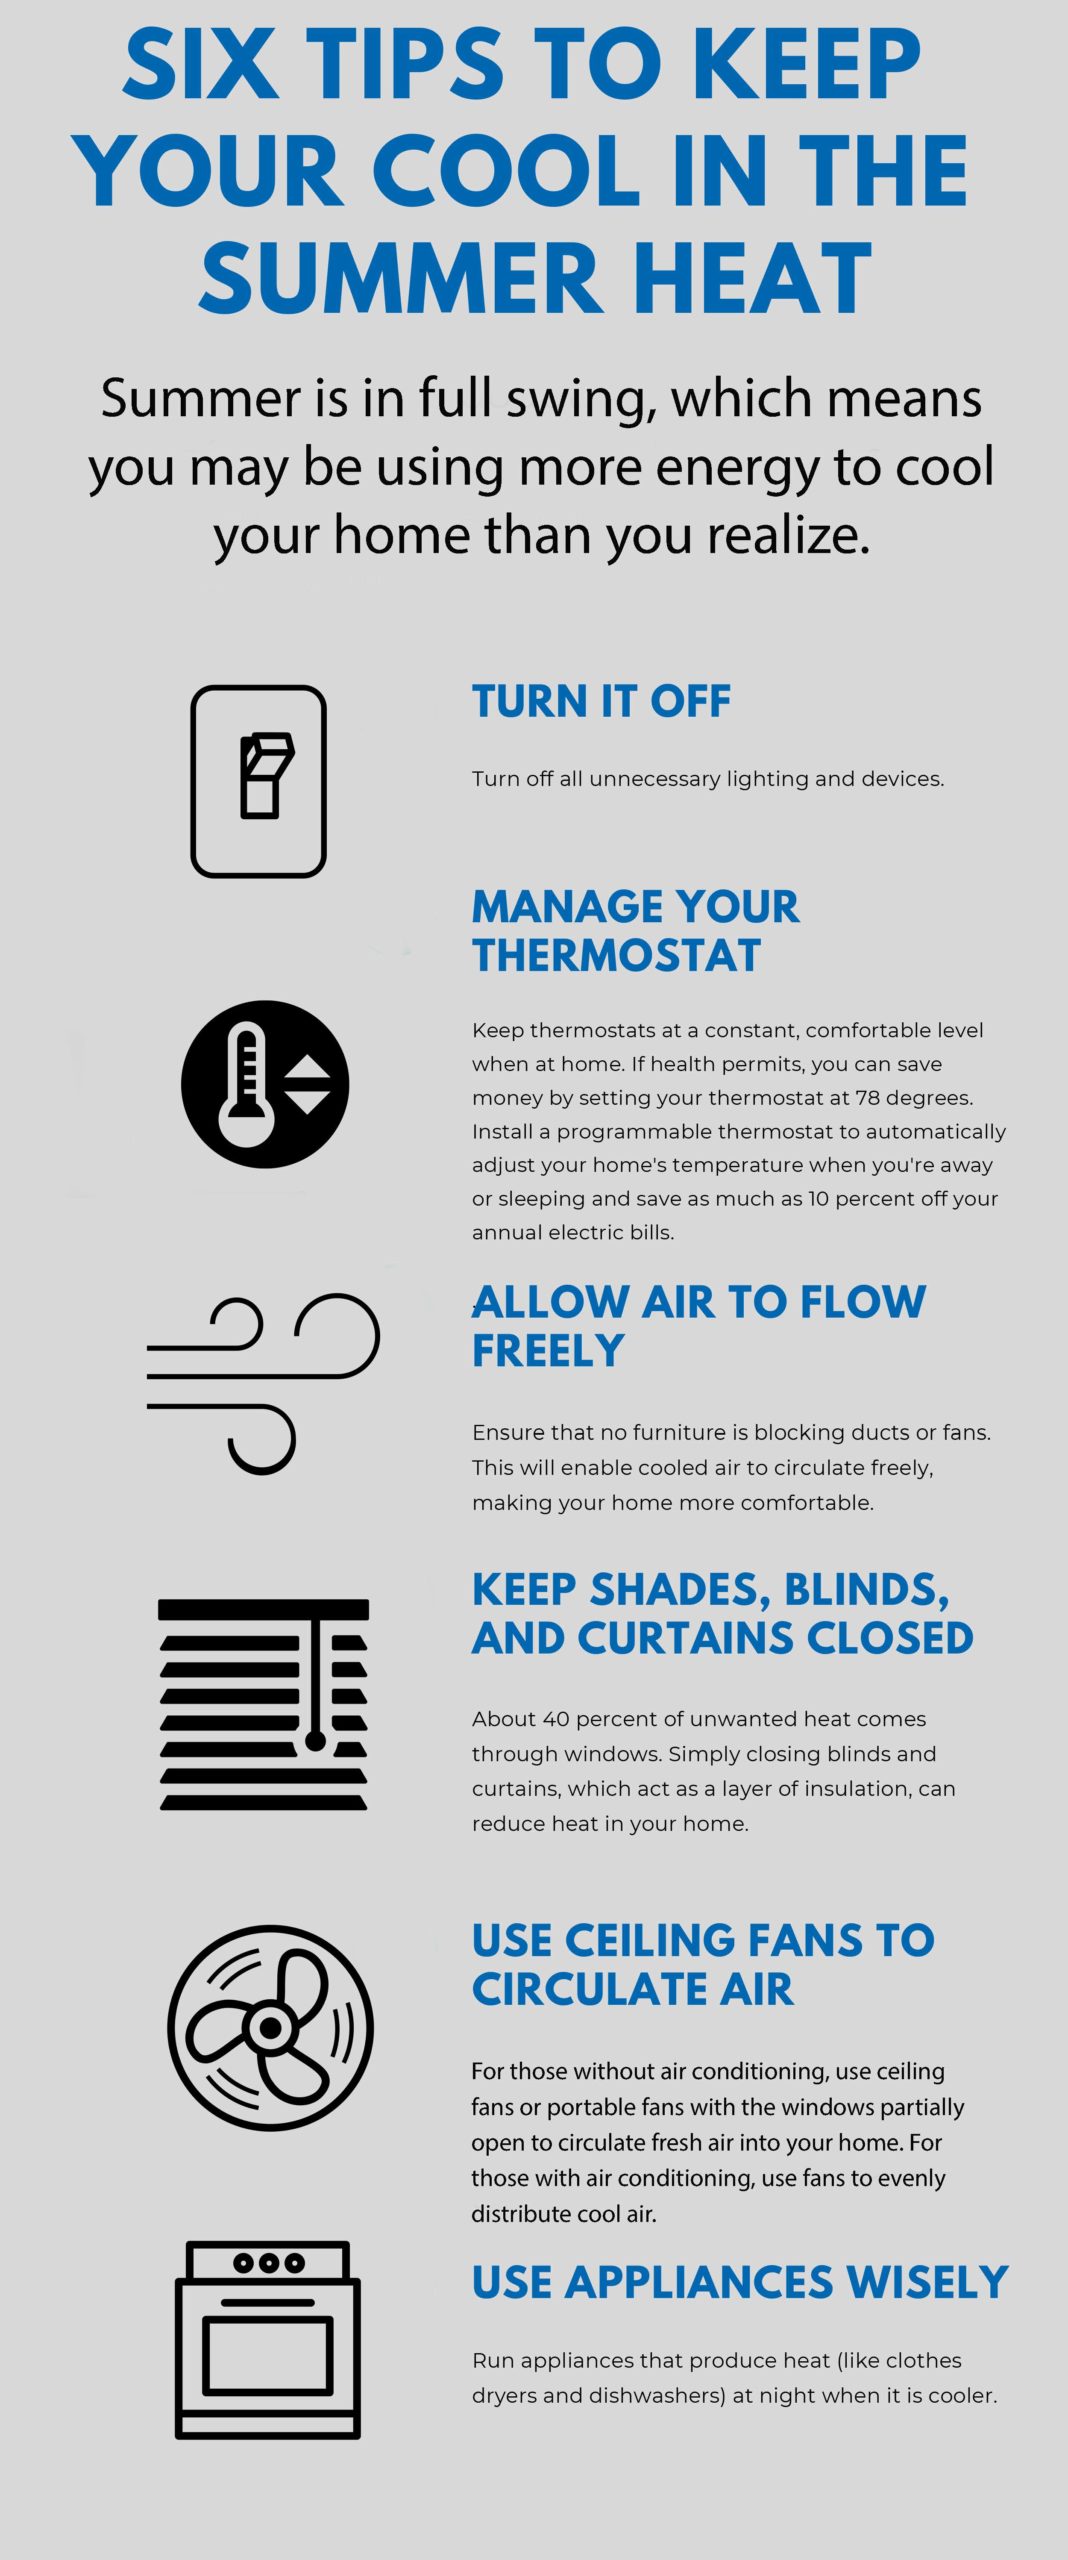 Cool it Down or Turn Up the Heat? The Pros and Cons of Different Summer Cooling Methods - Conclusion